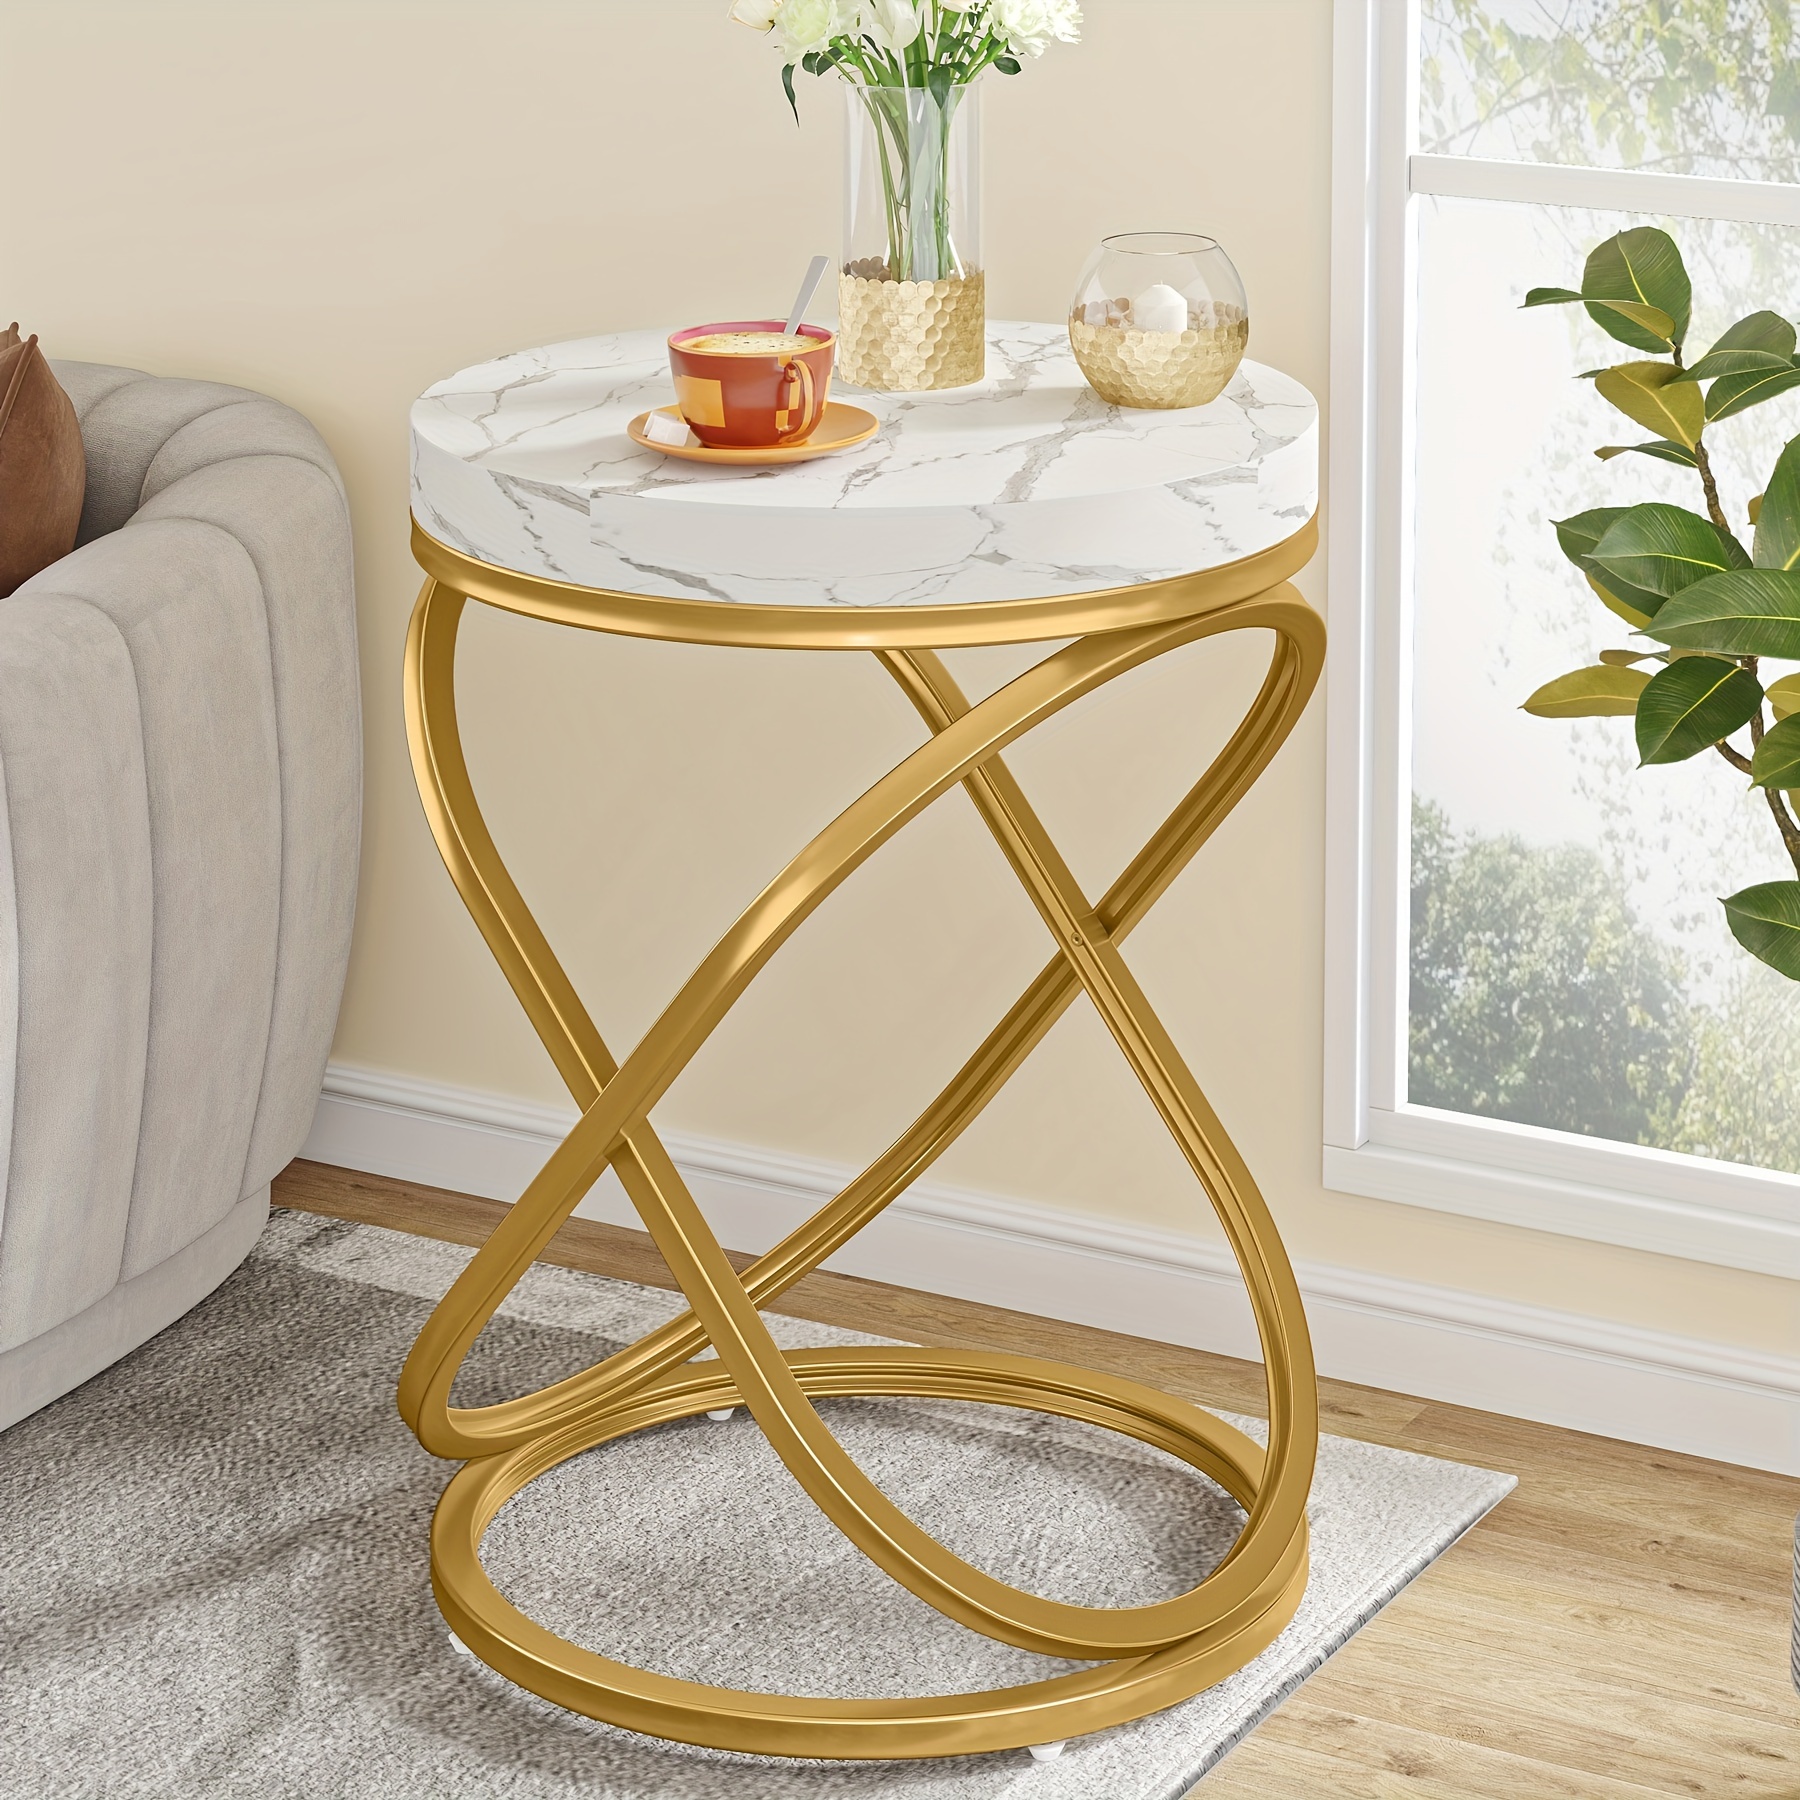 

Little Tree 26 Inches White And Gold Faux Marble Top End Tables Living Room, Round Nightstands Sofa Side Table With Double X-shaped Ring Unique Design For Bedroom